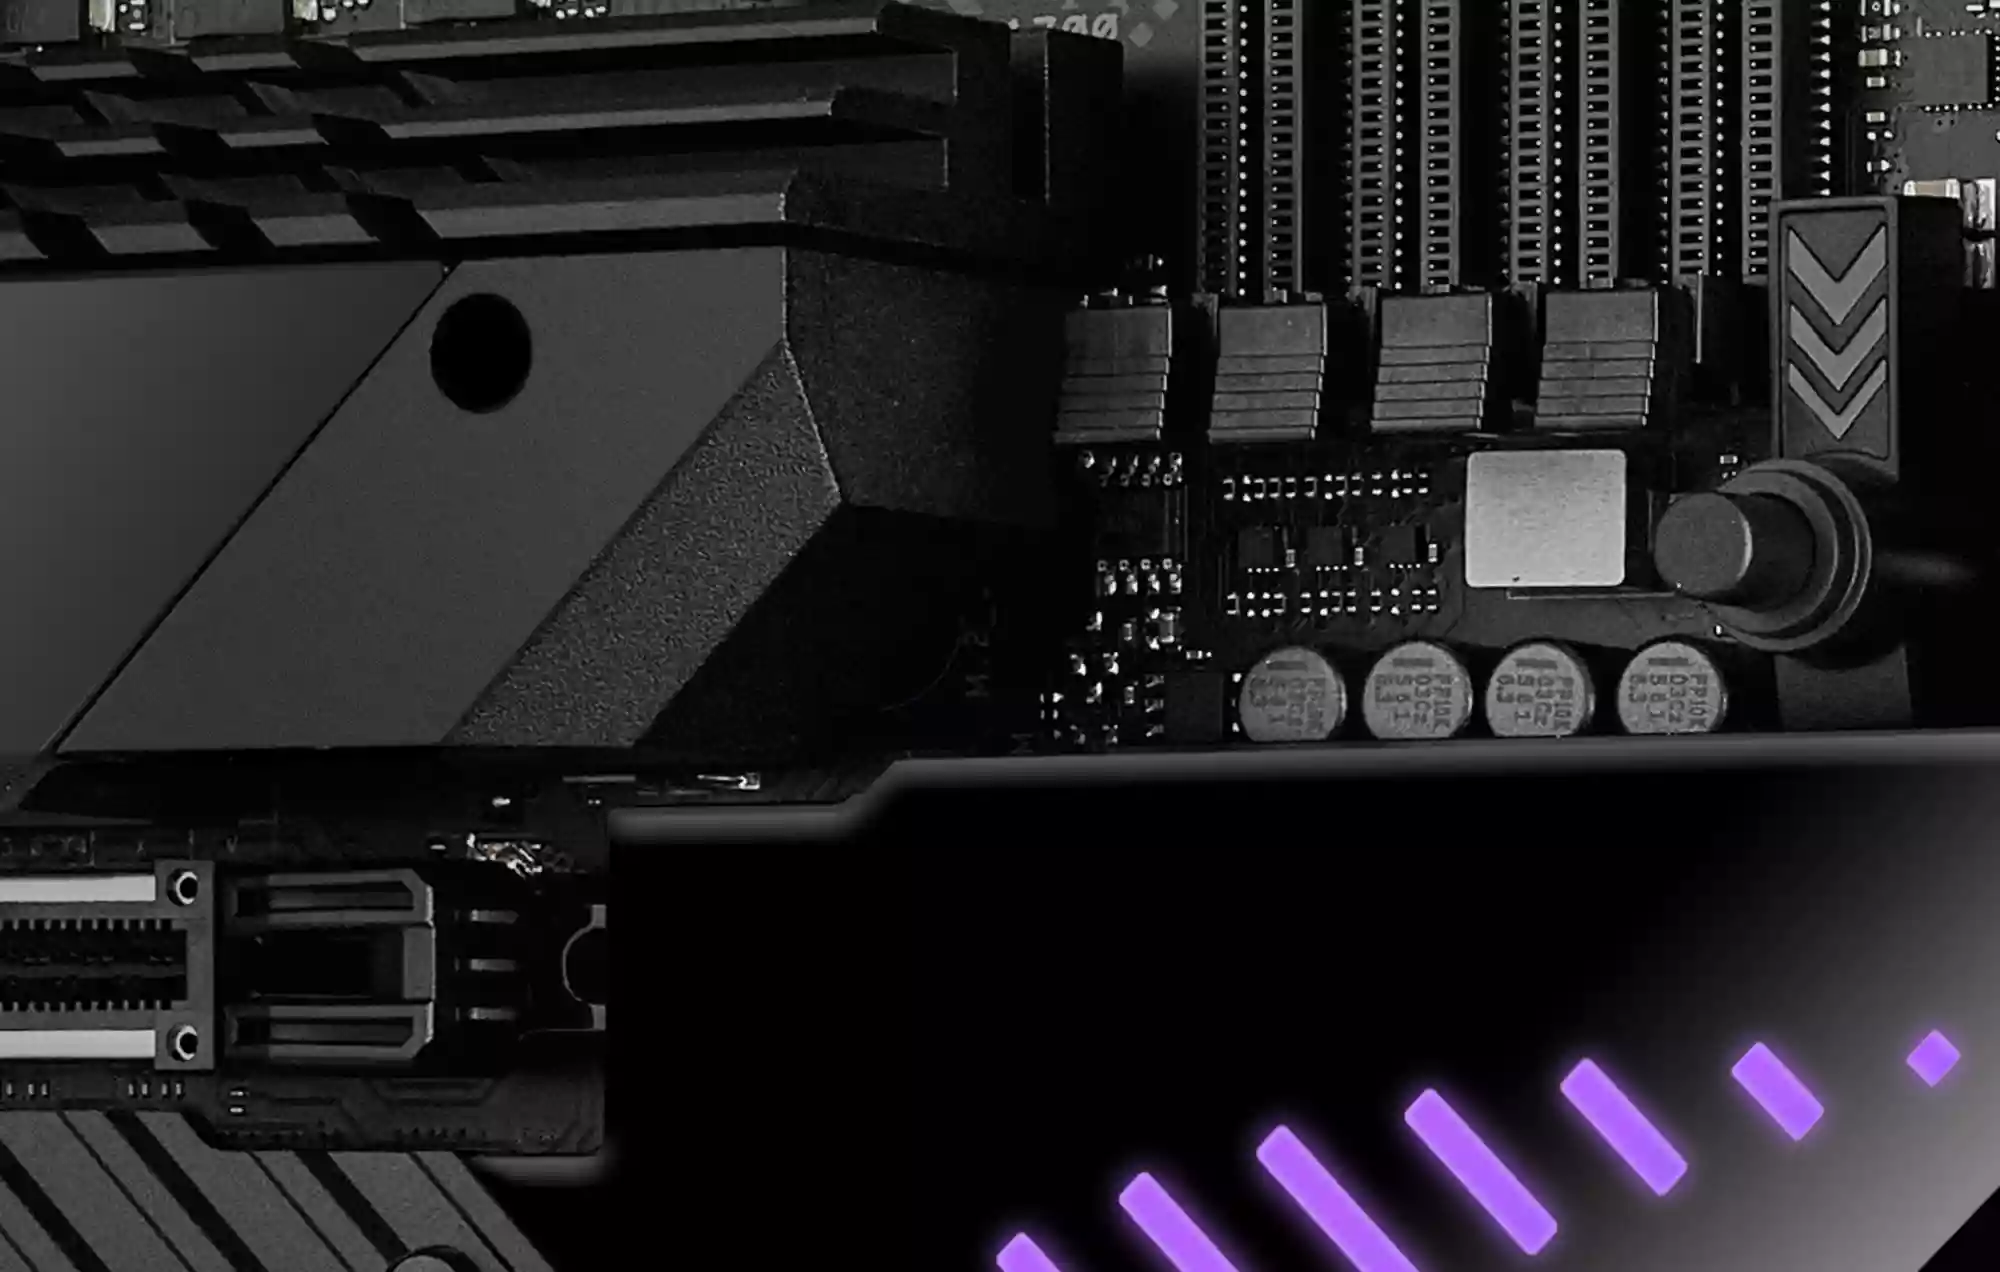 The PCIe Slot Q-Release button on the ROG Maximus Z790 Extreme motherboard